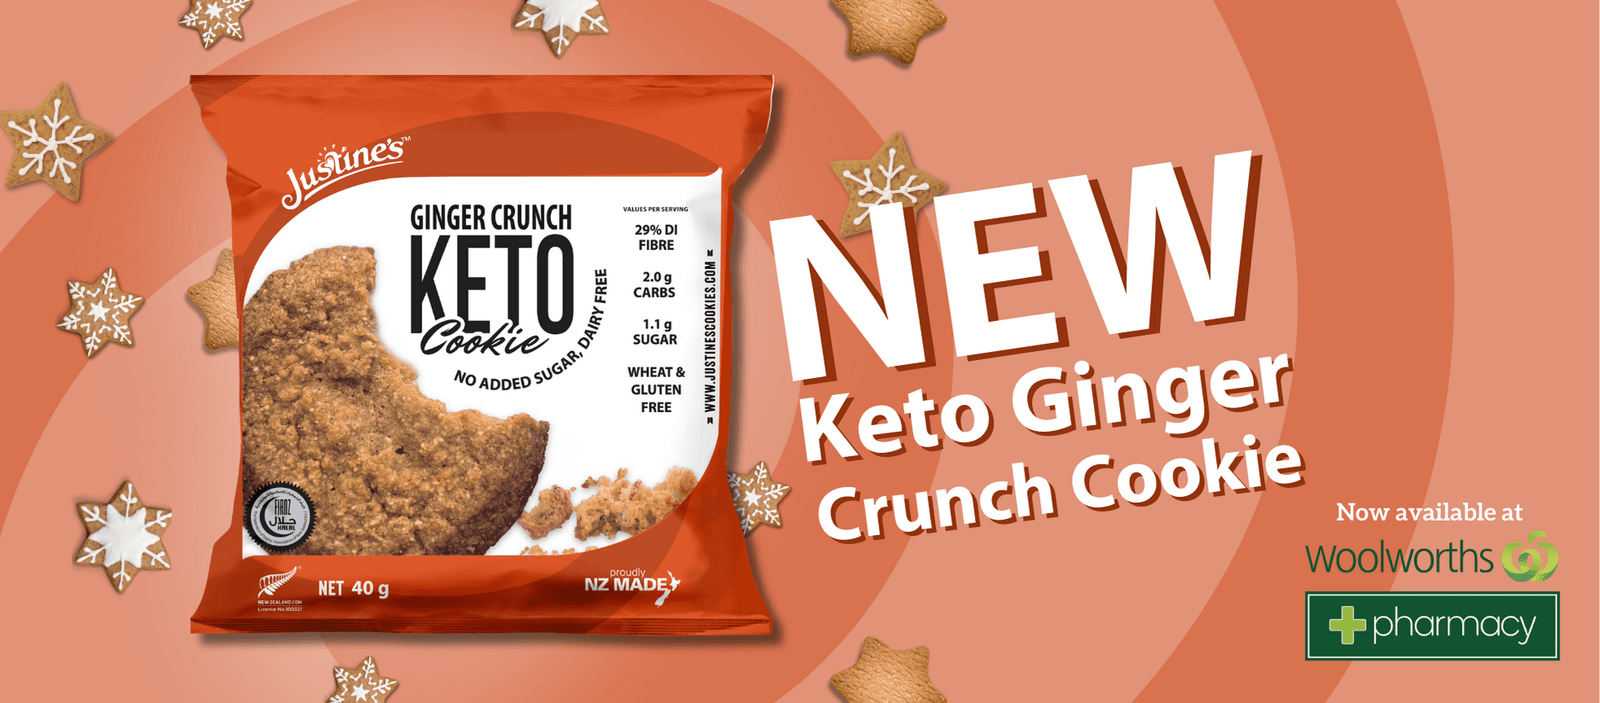 Justine's New Keto Ginger Crunch Cookie now at woolworths pharmacy nz